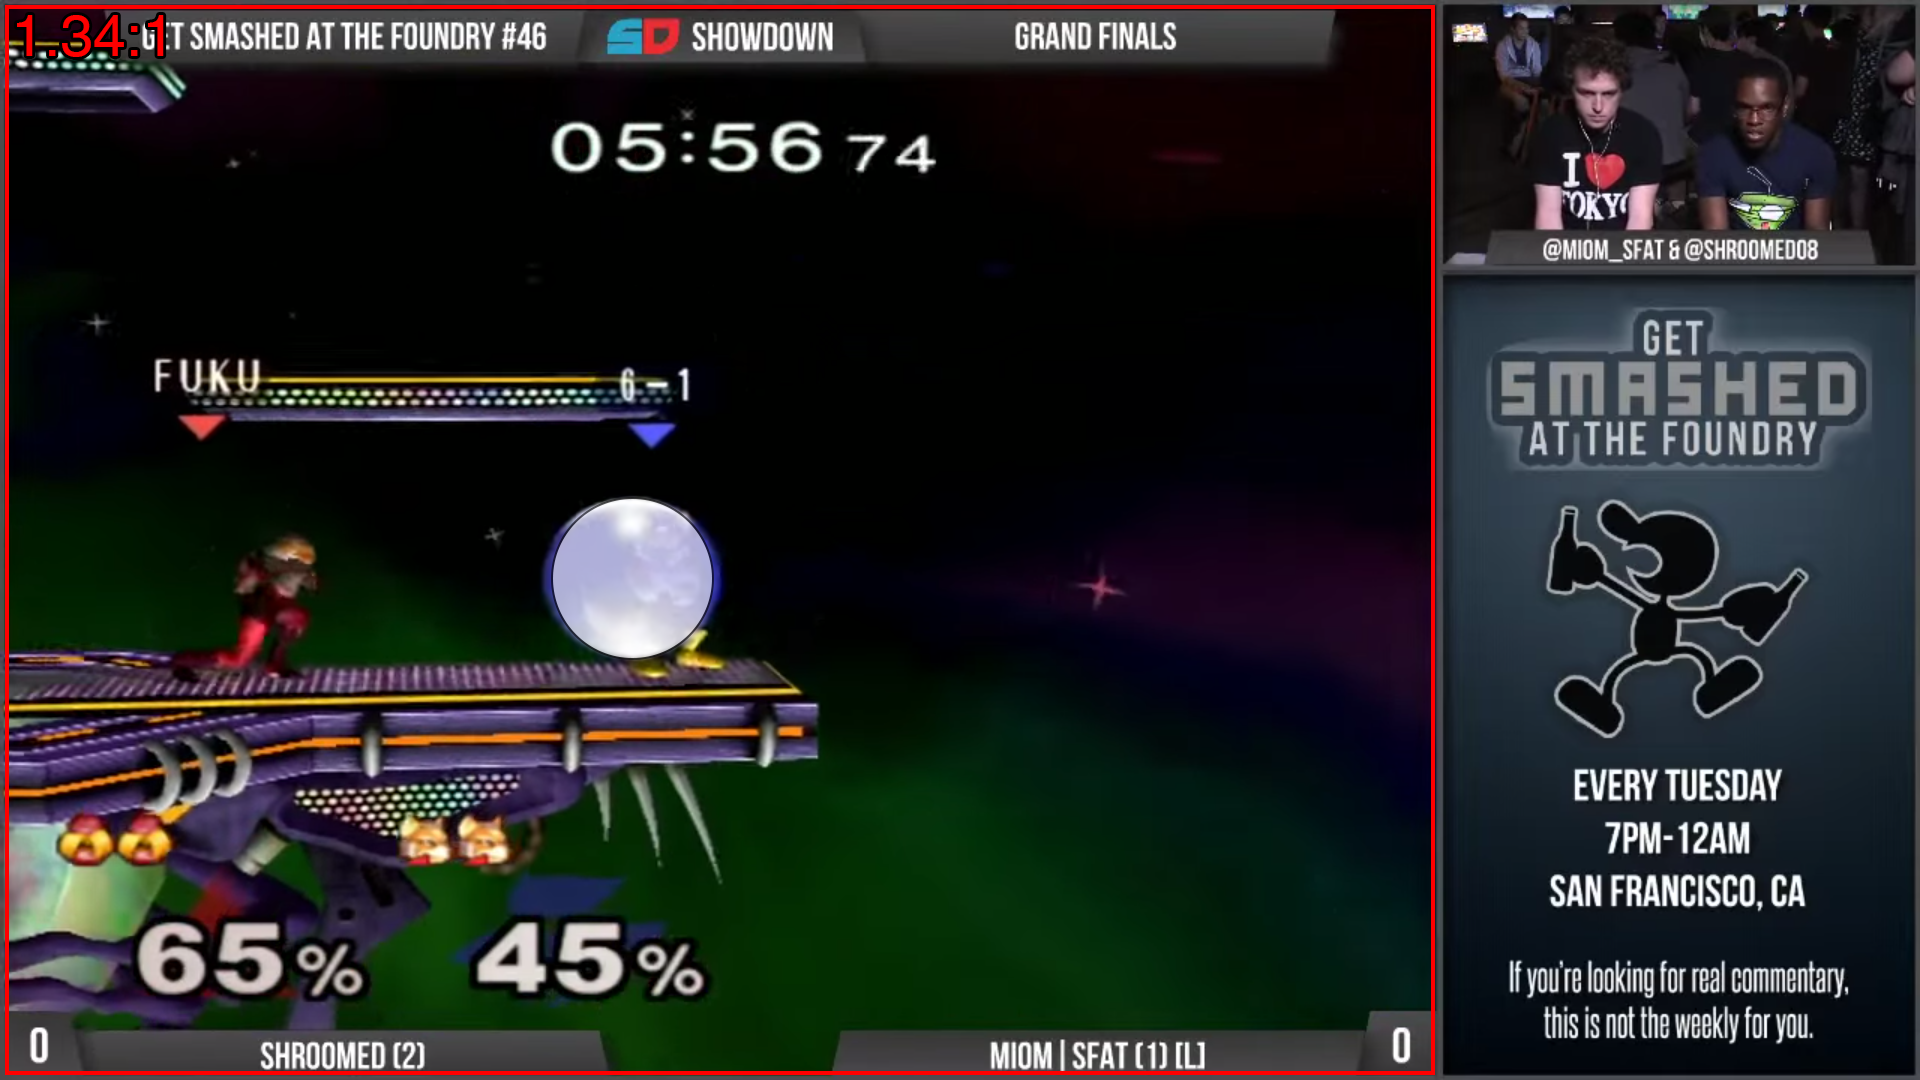 Aspect ratio of Melee on a Foundry stream